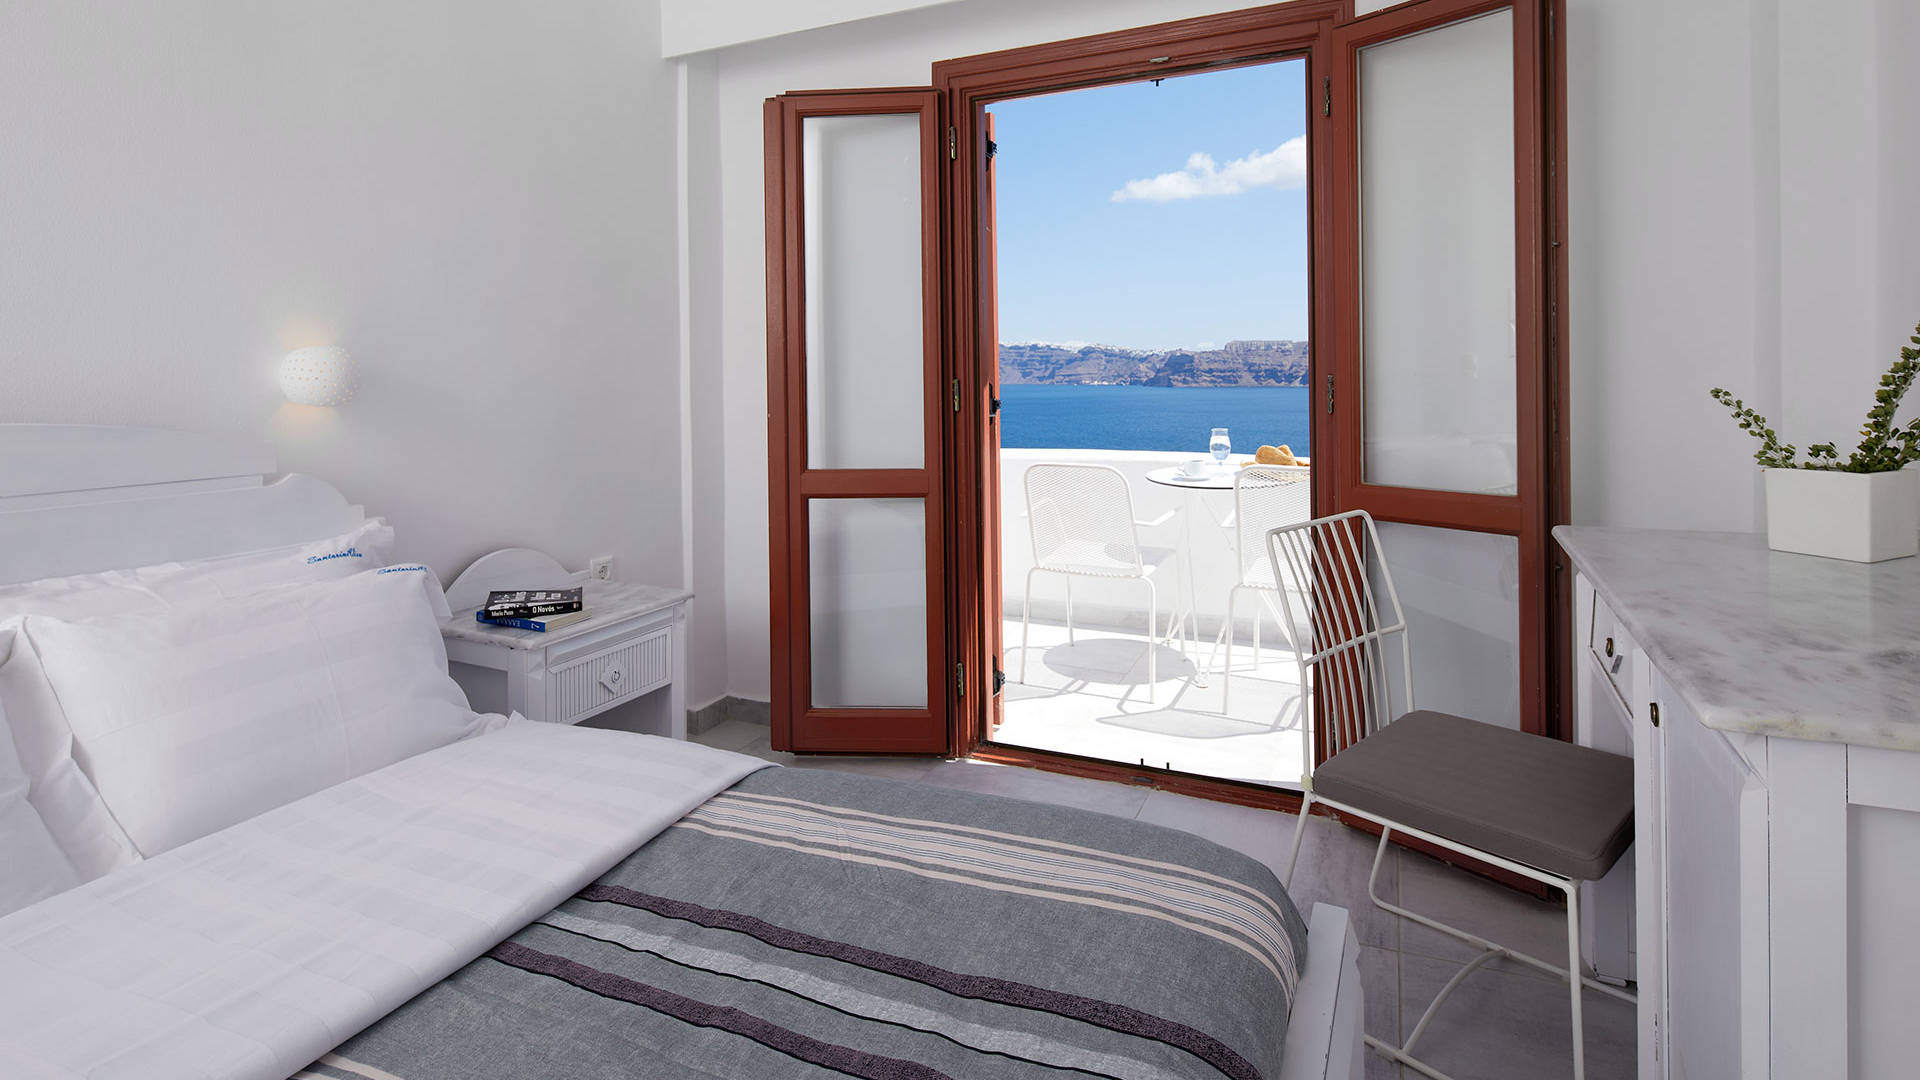 
Santorini View Hotel bedroom with king size bed with white and grey linen, and sea view balcony with white furniture